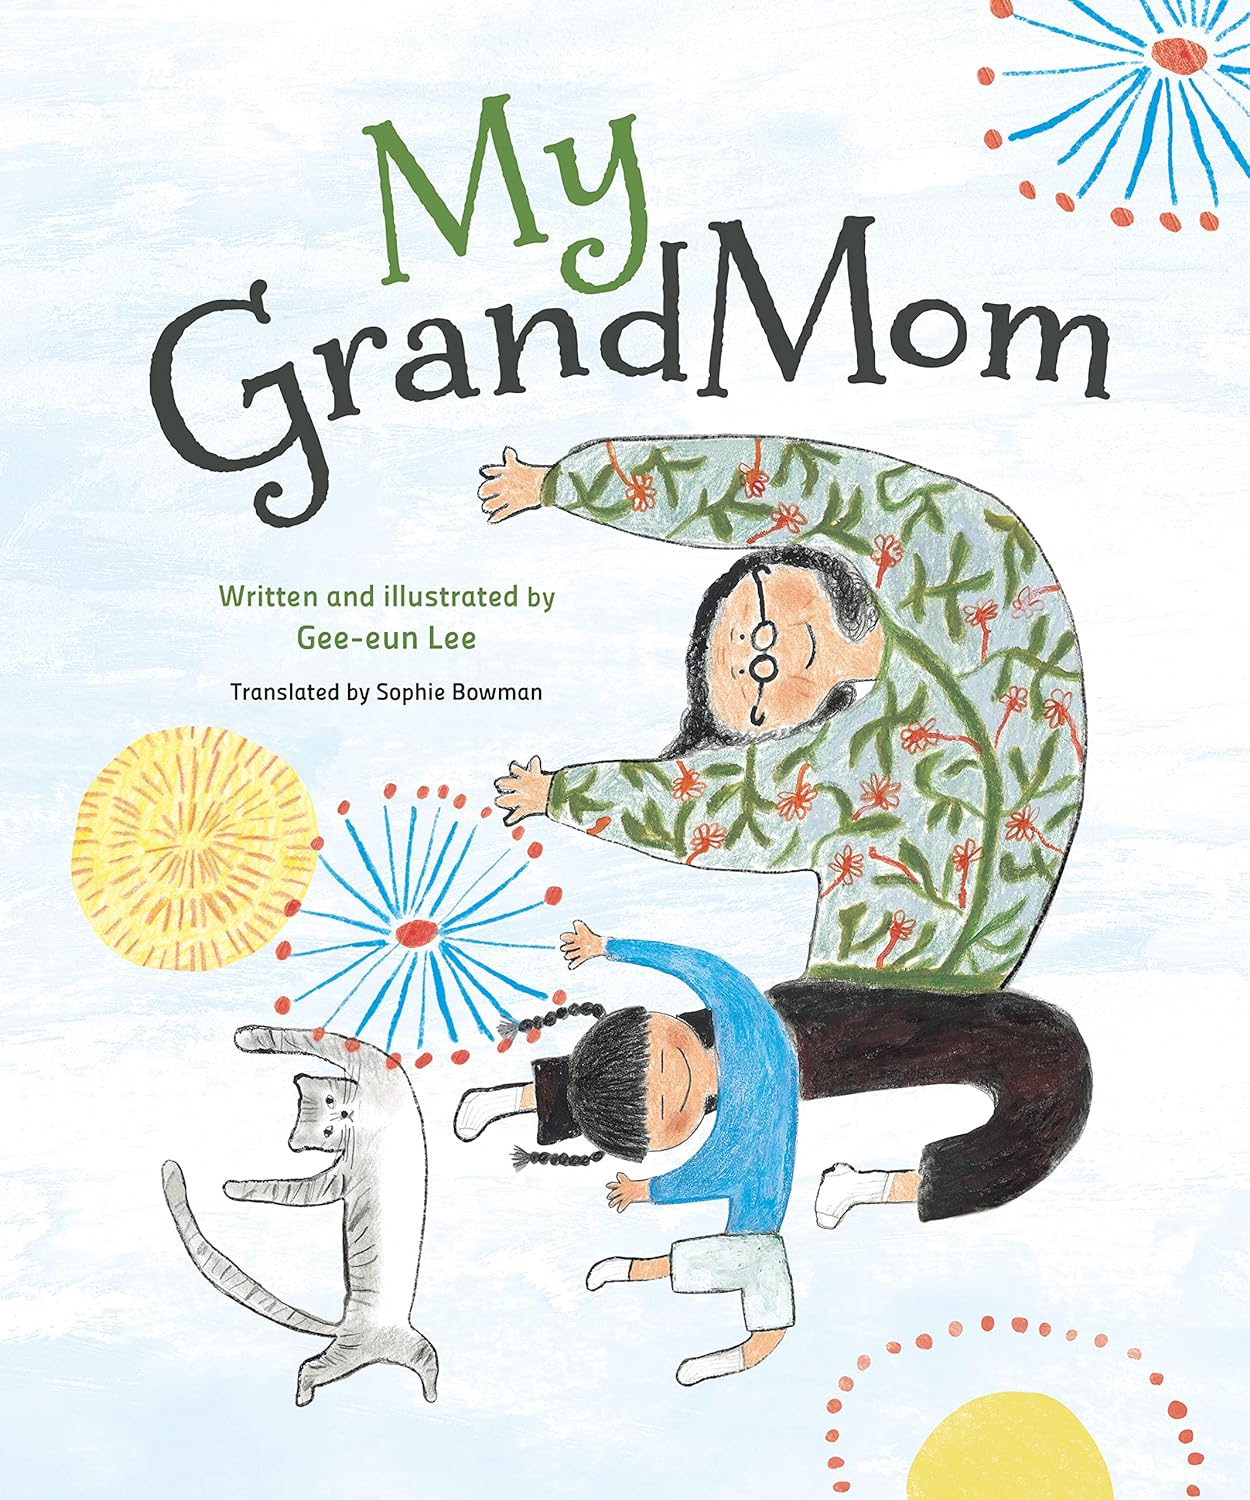 Cover for My GrandMom featuring a pencil or crayon illustration of a grandma, grandchild, and cat all doing the same joyful pose with their hands outstretched and their bodies in a C shape. There are fireworks drawn around and behind them.